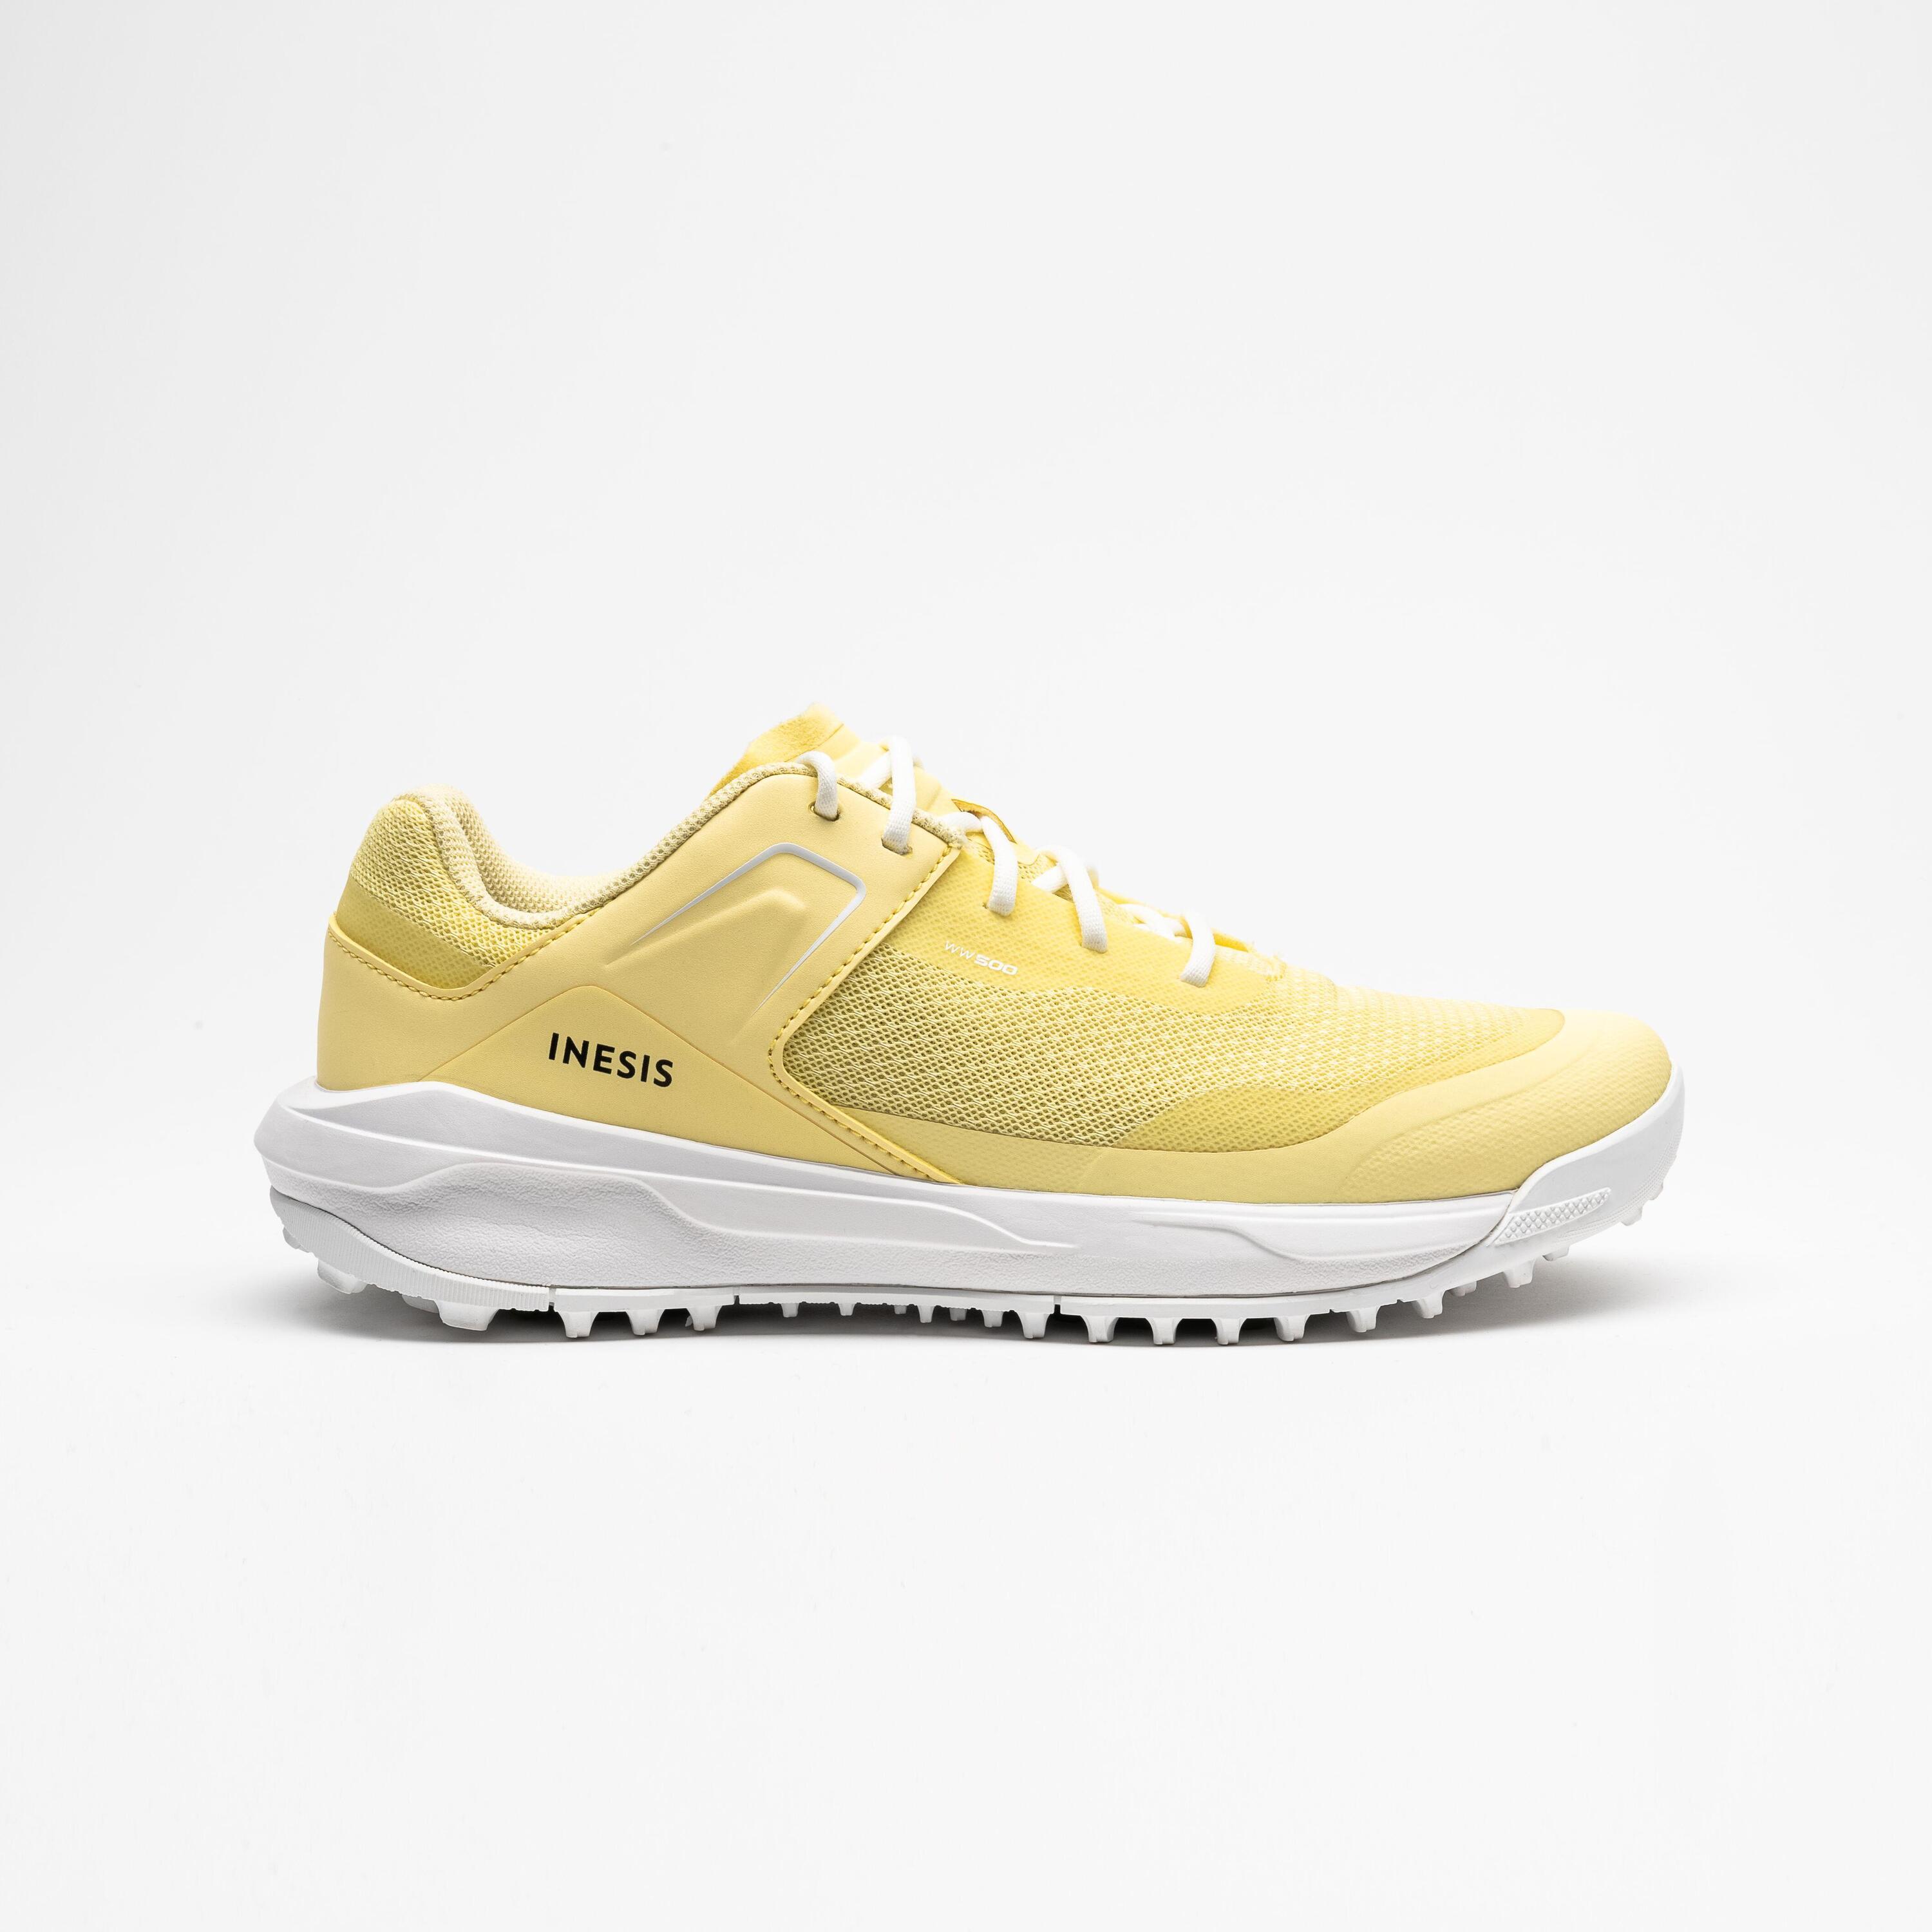 INESIS Women's Breathable Golf Shoes - WW 500 Yellow